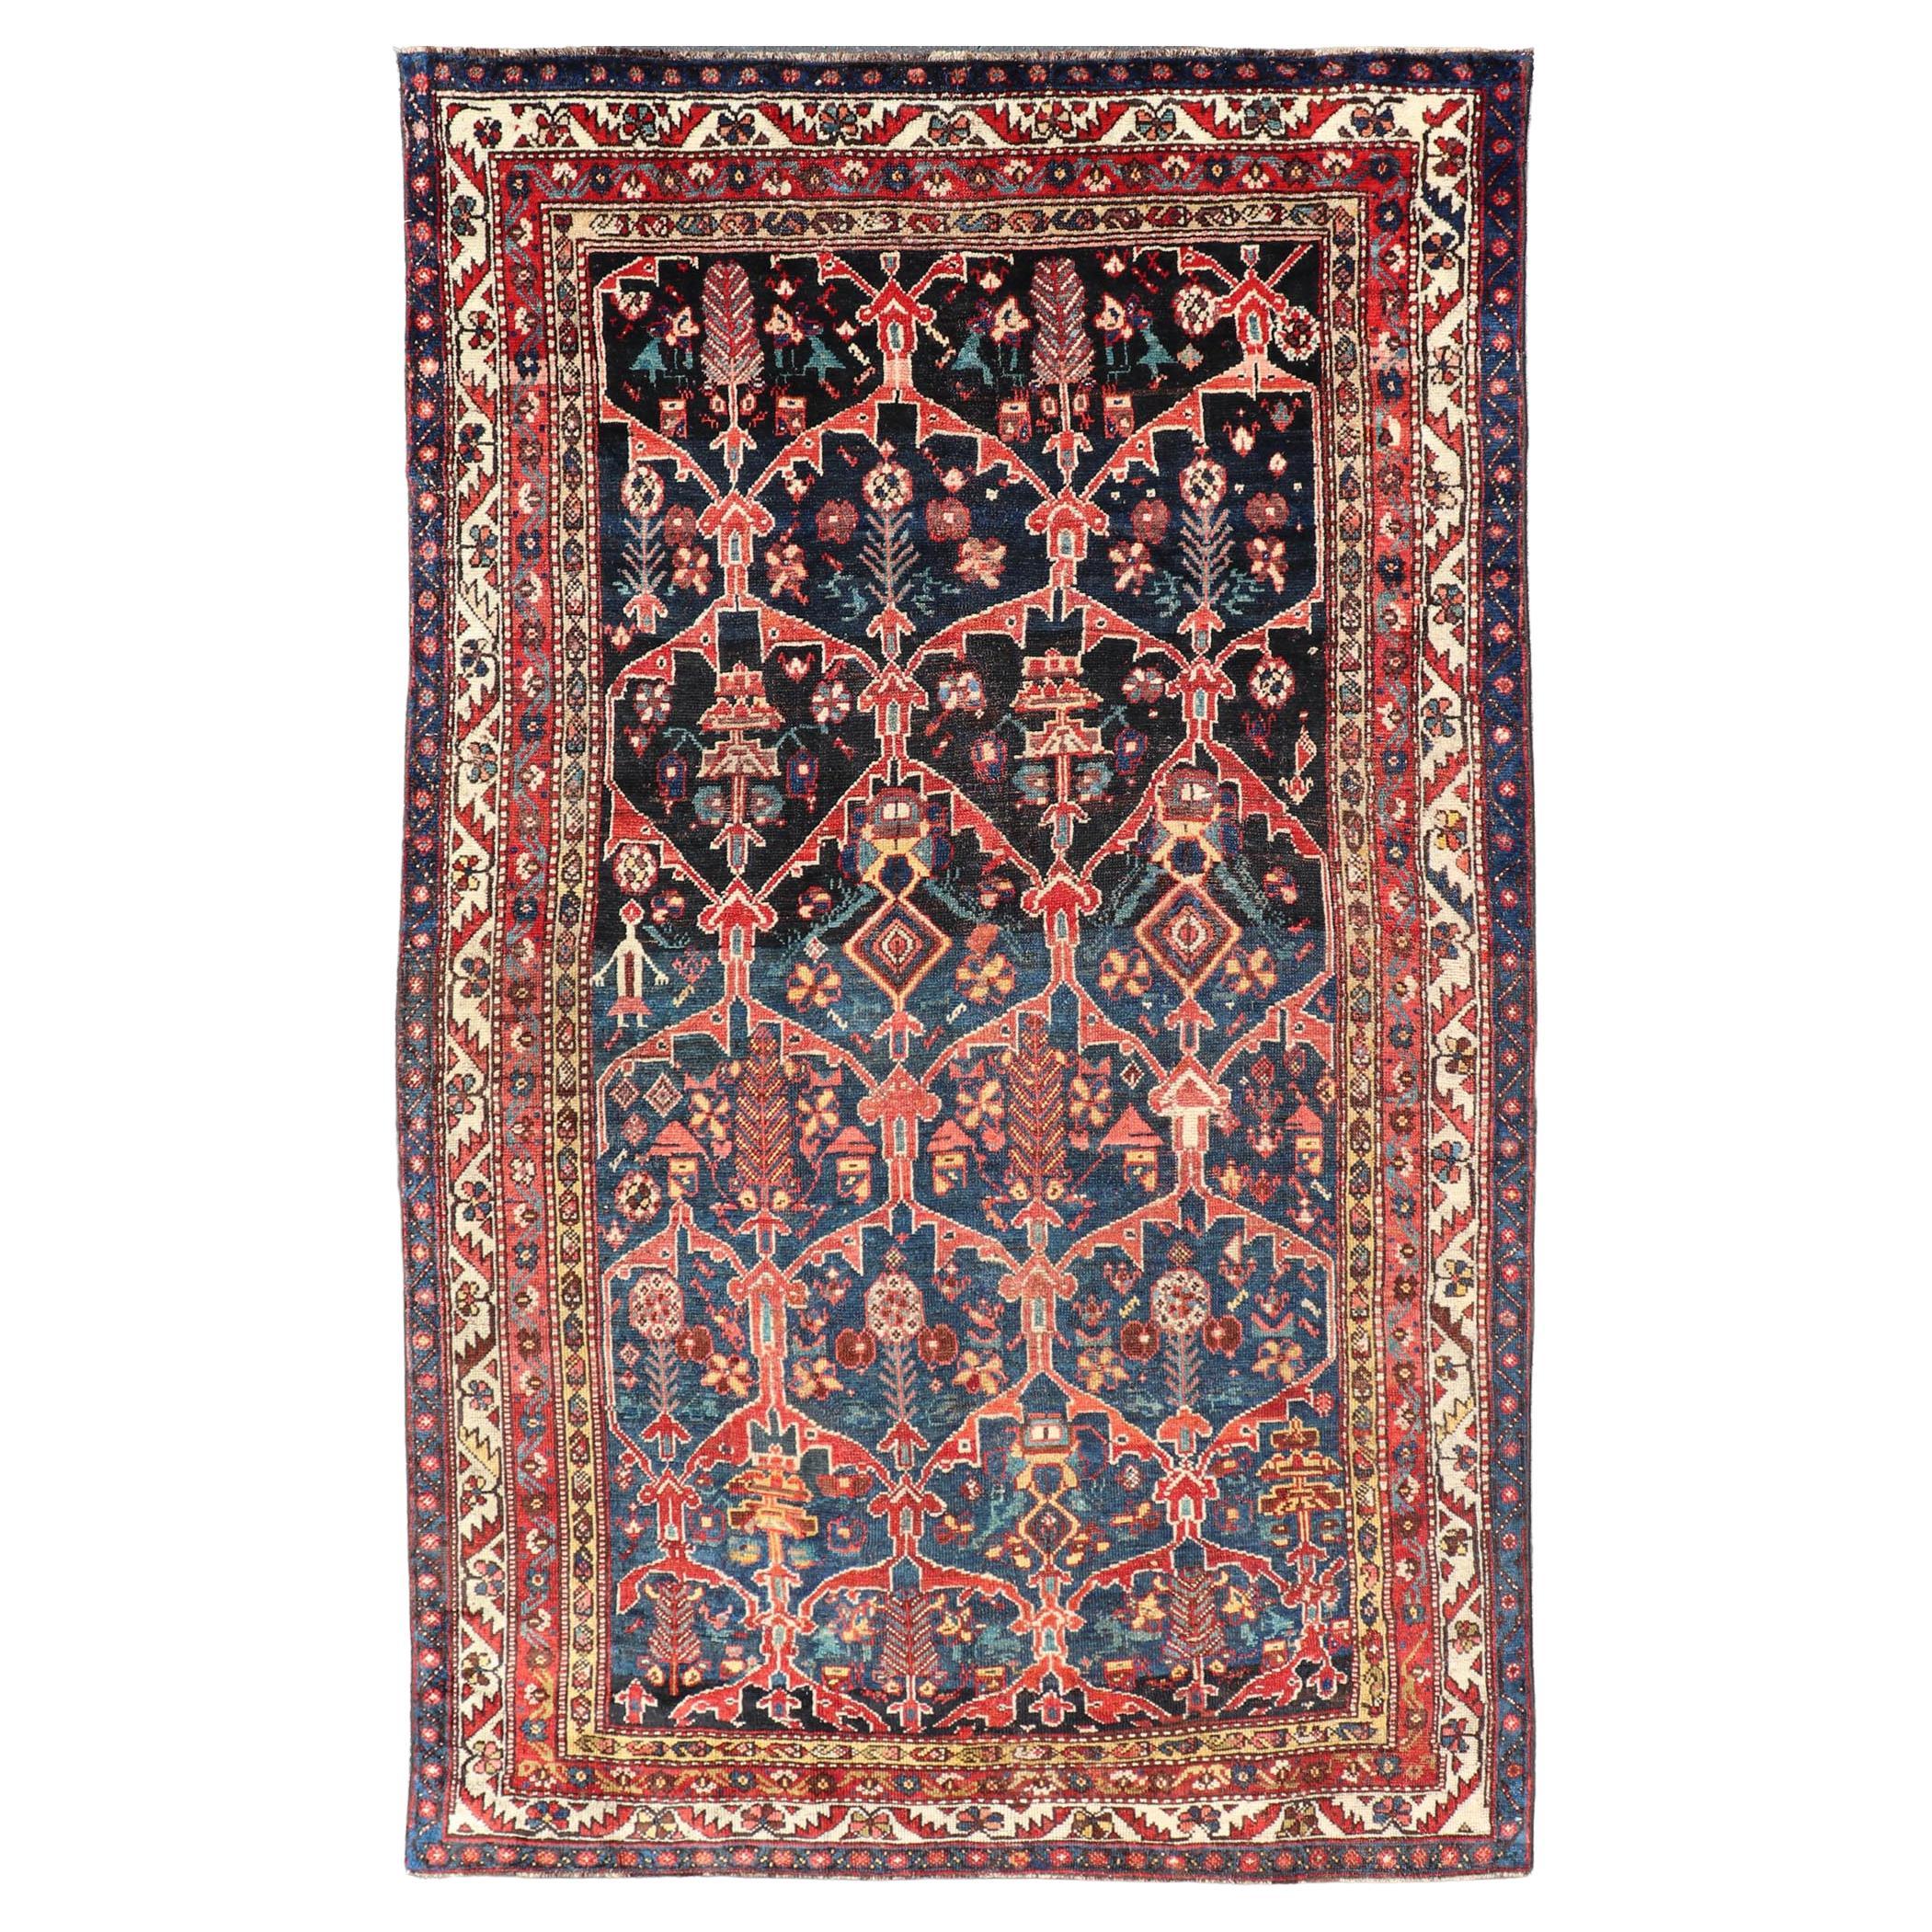 Antique Persian Bakhitari Colorful Rug with All-Over Floral Medallion Design 